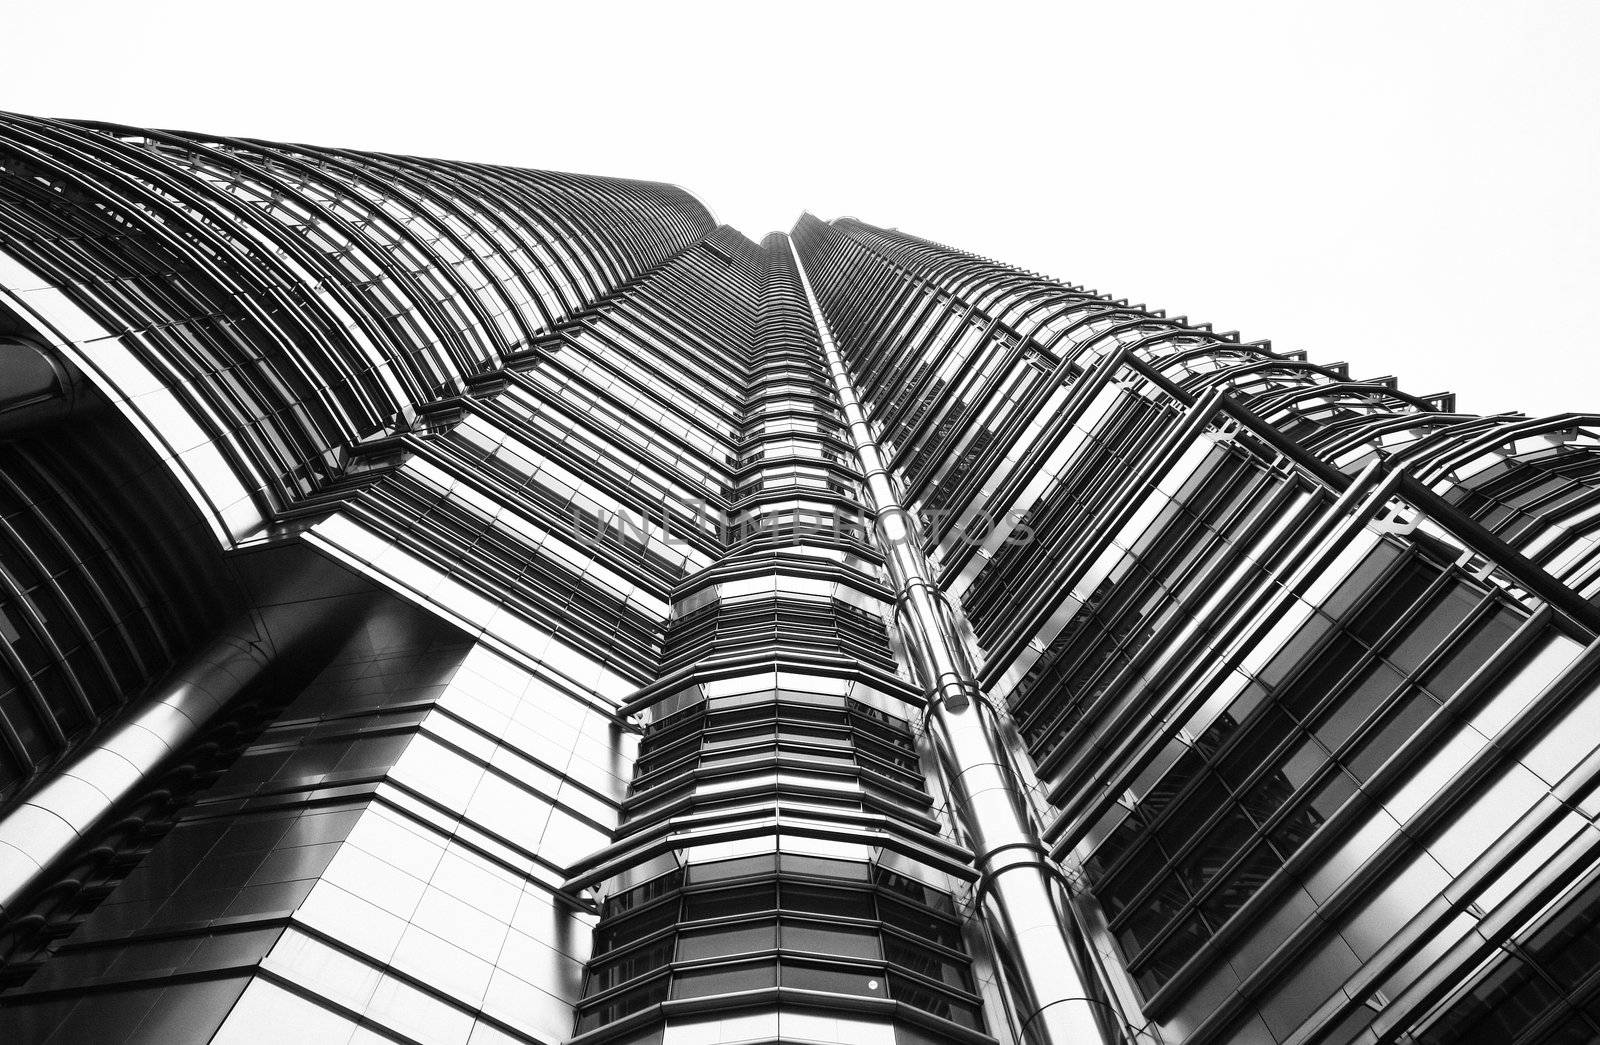 Close-up of details on the science fiction architecture of the Petronas Towers.